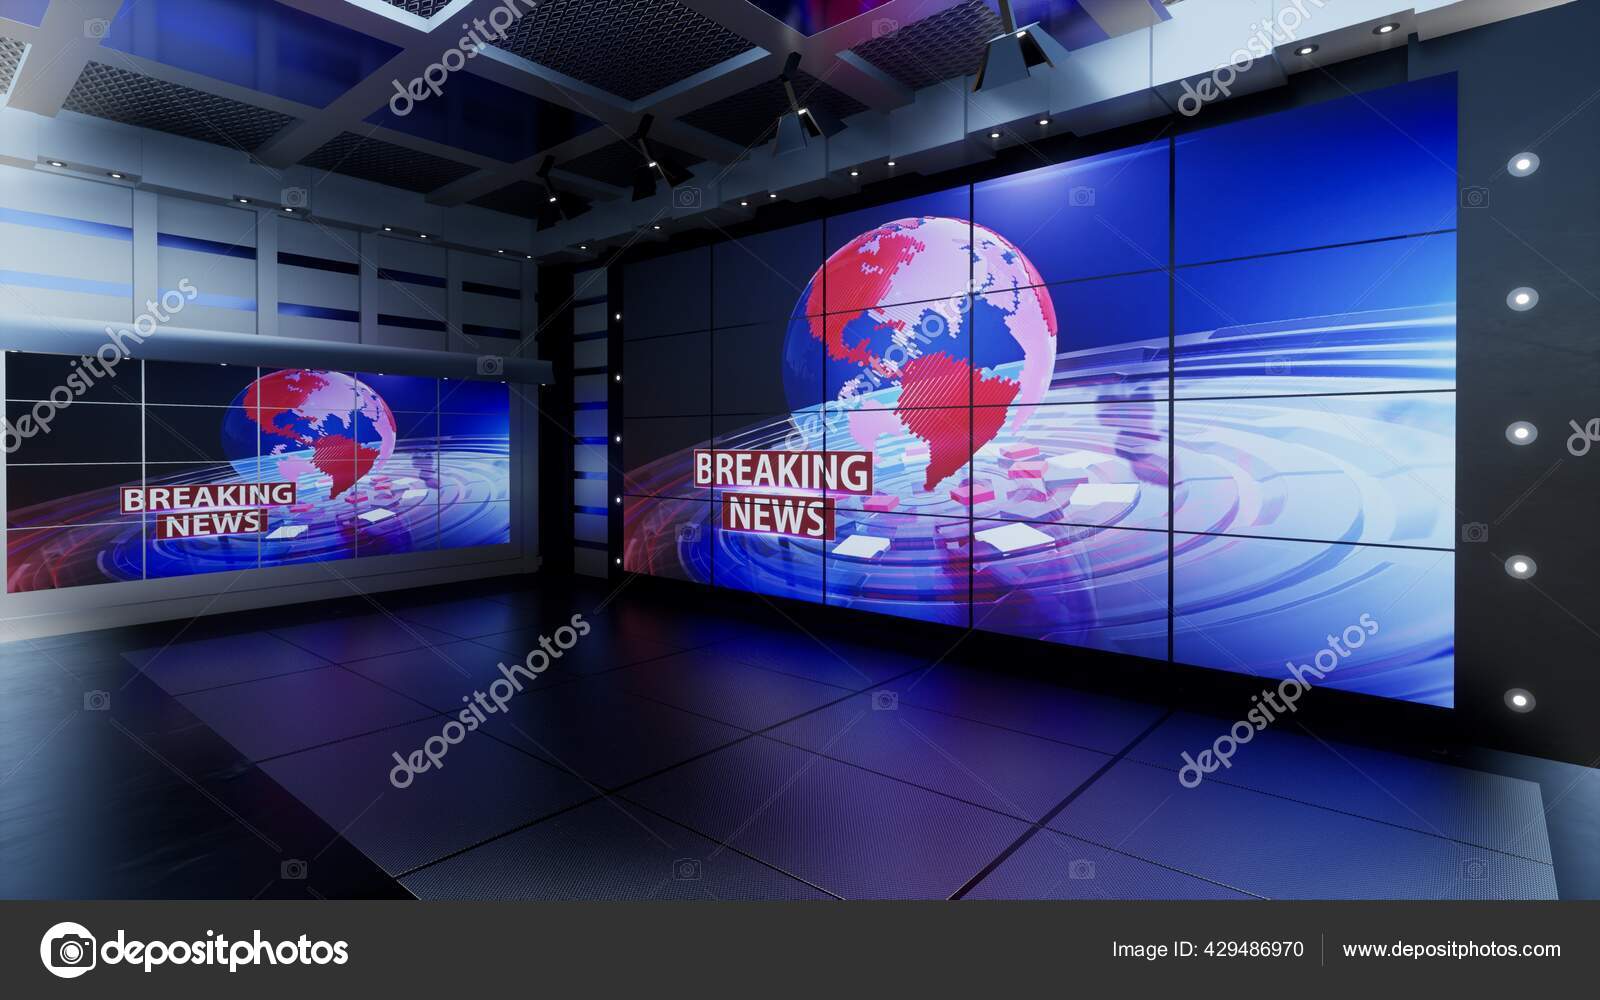 News Studio Backdrop Shows Wall Virtual News Studio Background Illustration Stock Photo By C Mus Graphic